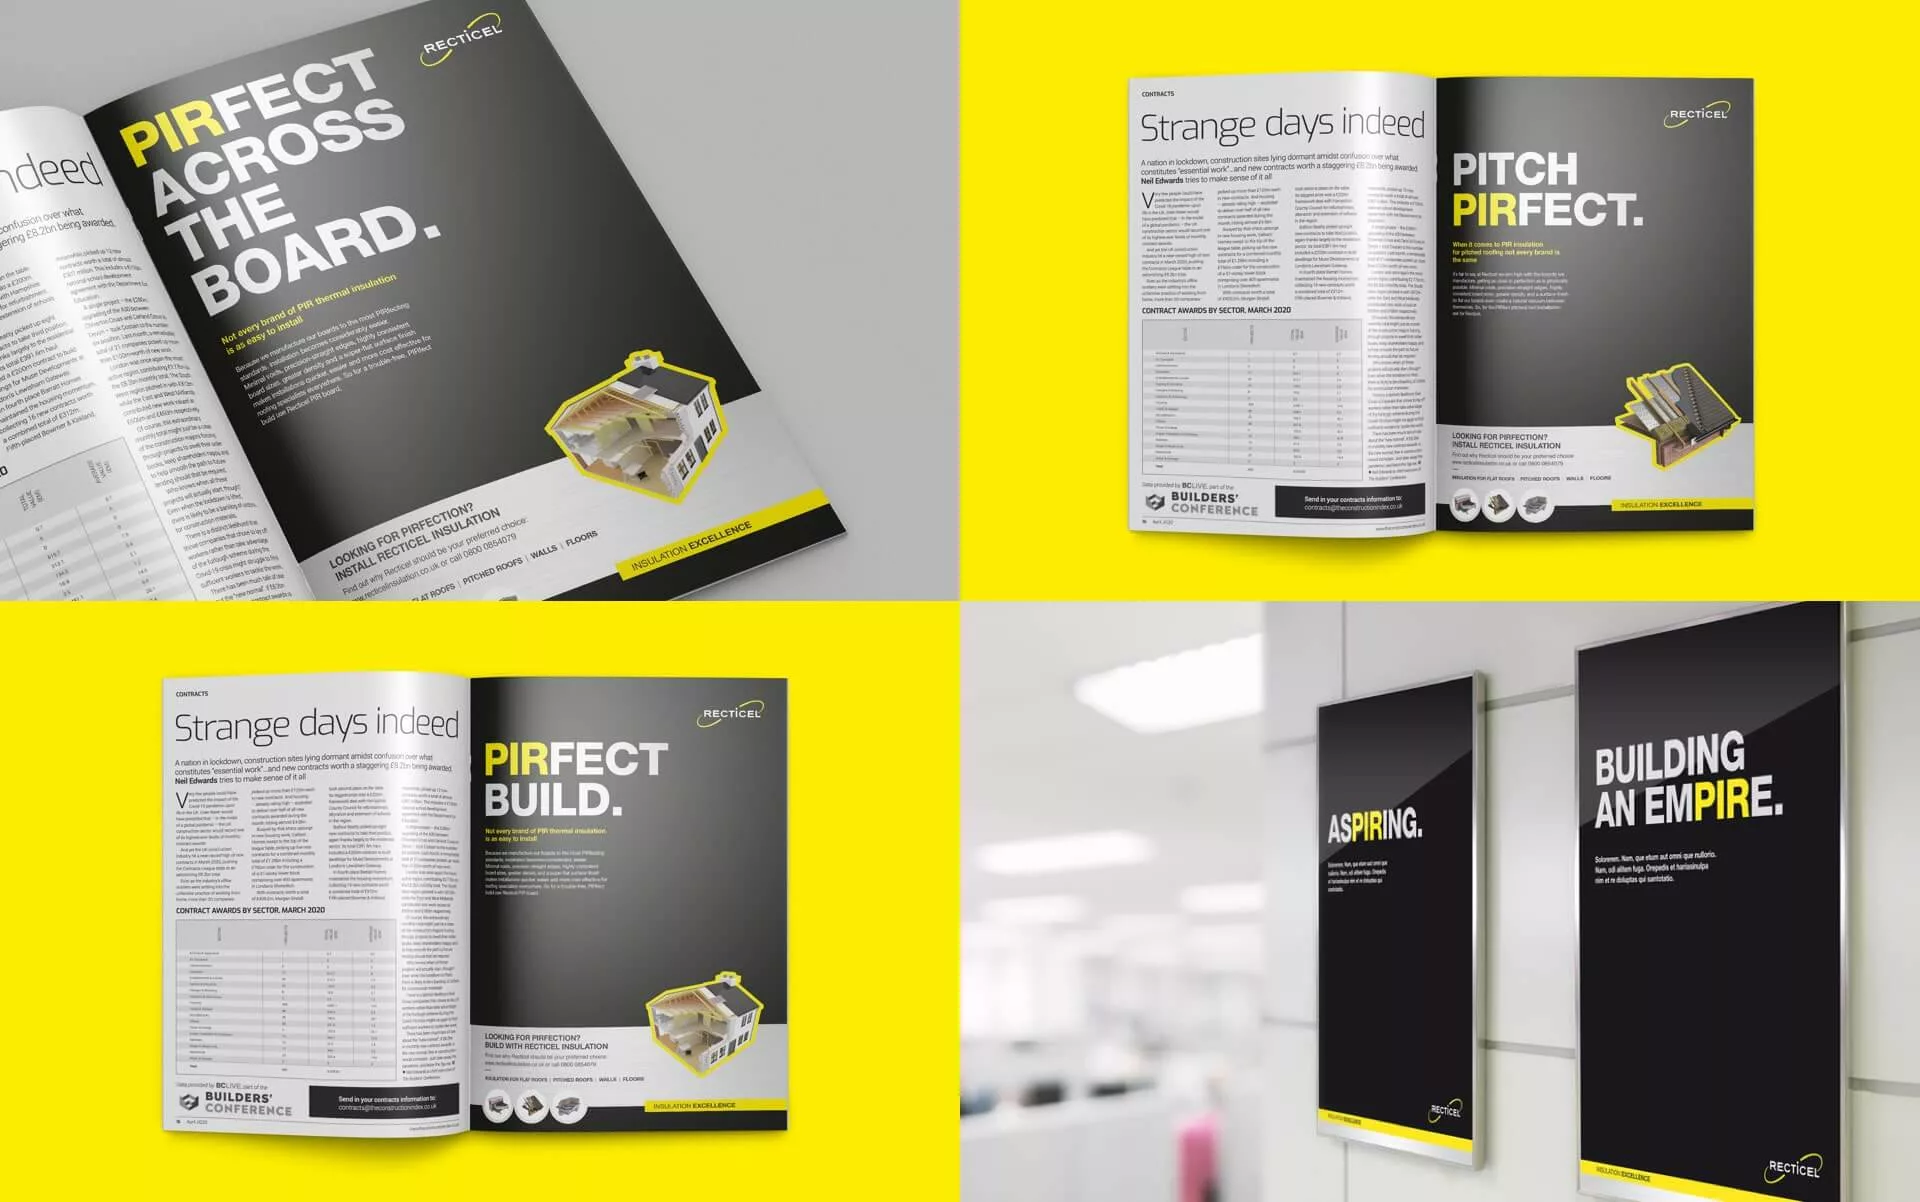 Four images showing the recticel magazine and wall prints